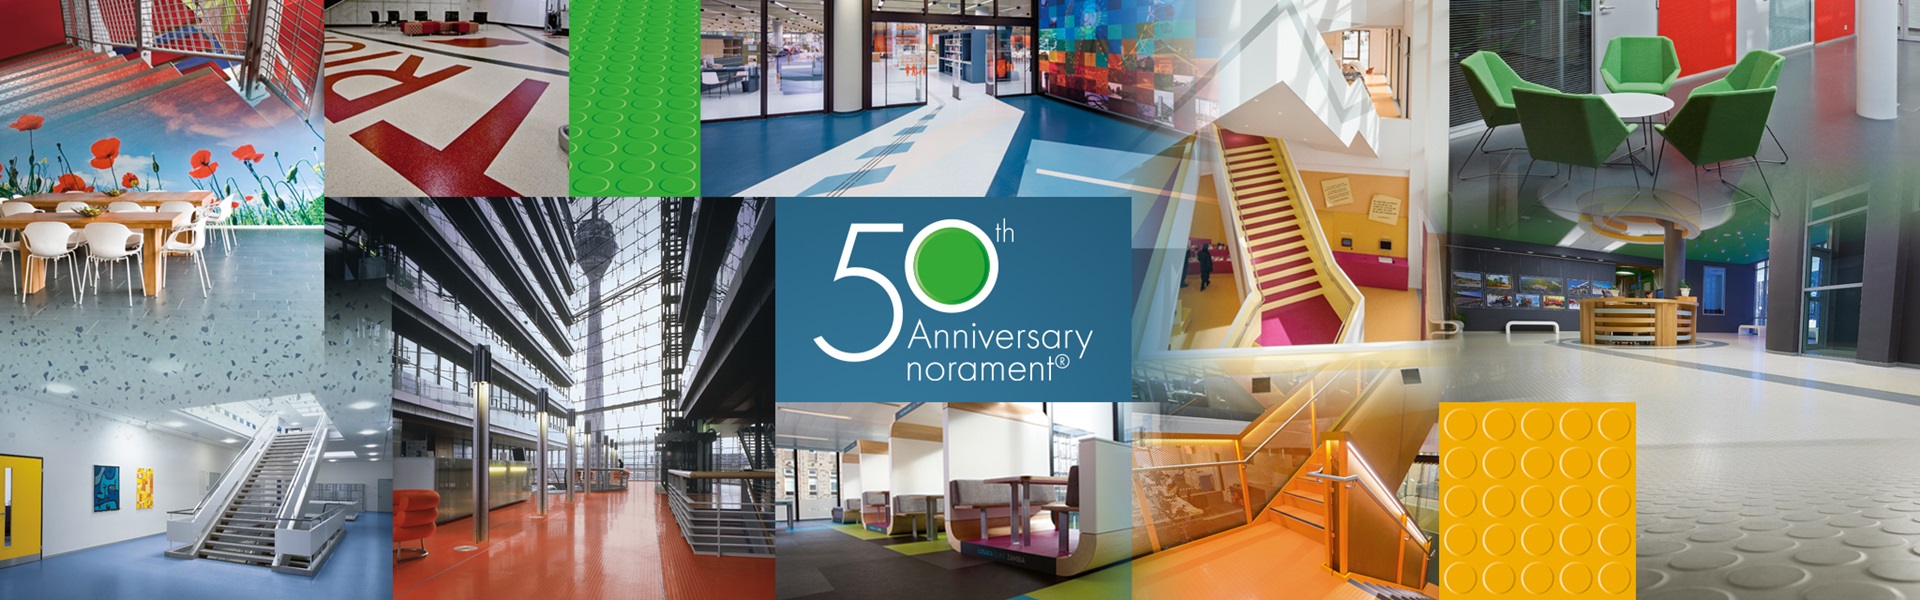 50 years of norament